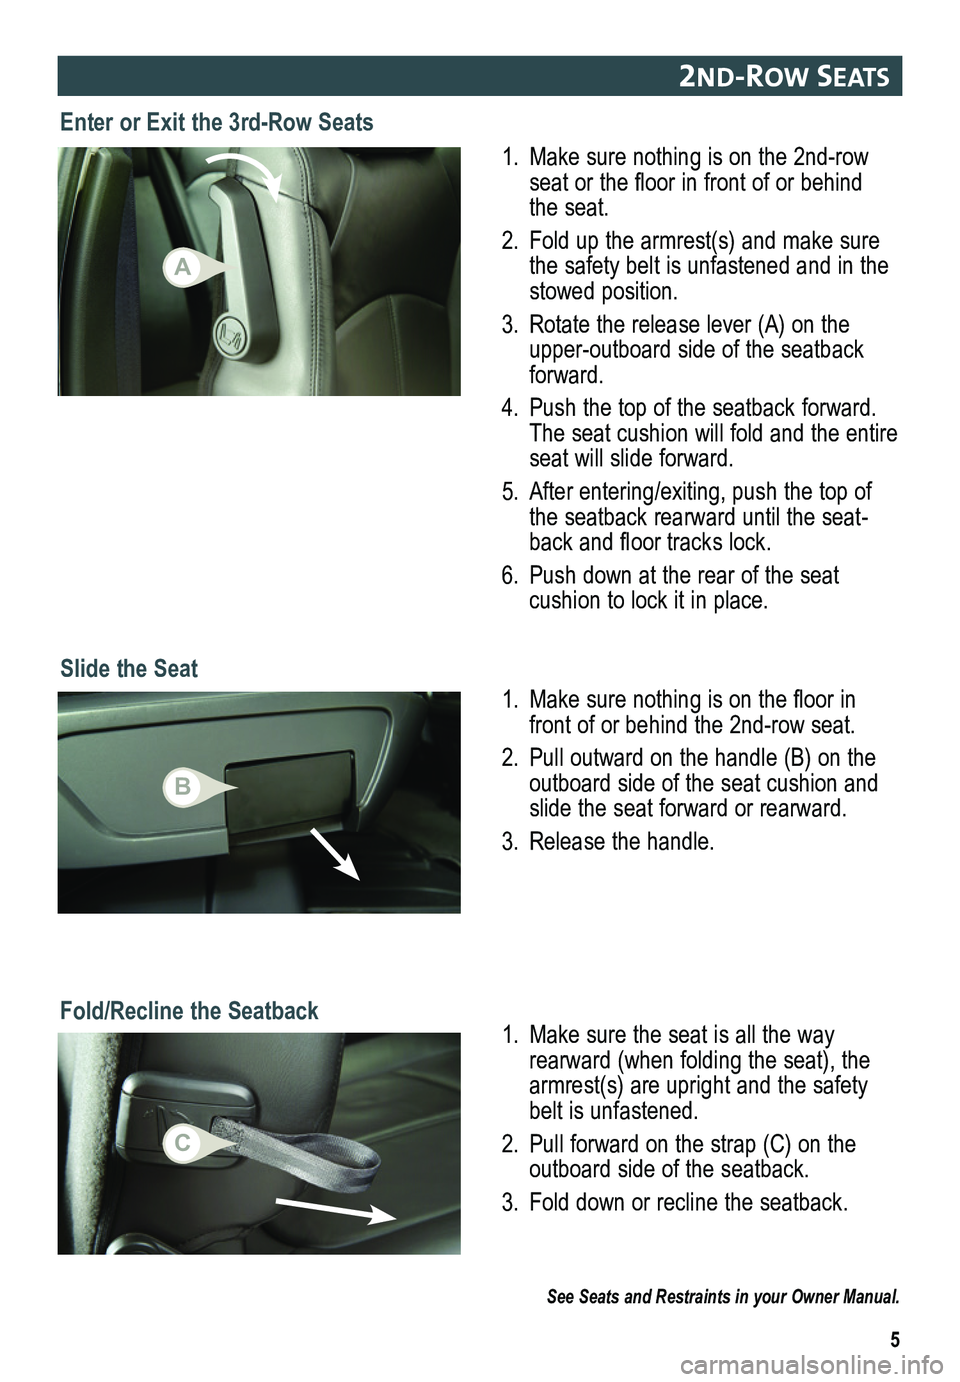 GMC ACADIA 2015  Get To Know Guide 5
2nd-row seats 
Slide the Seat
1. Make sure nothing is on the 2nd-row seat or the floor in front of or behind the seat.
2. Fold up the armrest(s) and make sure the safety belt is unfastened and in th